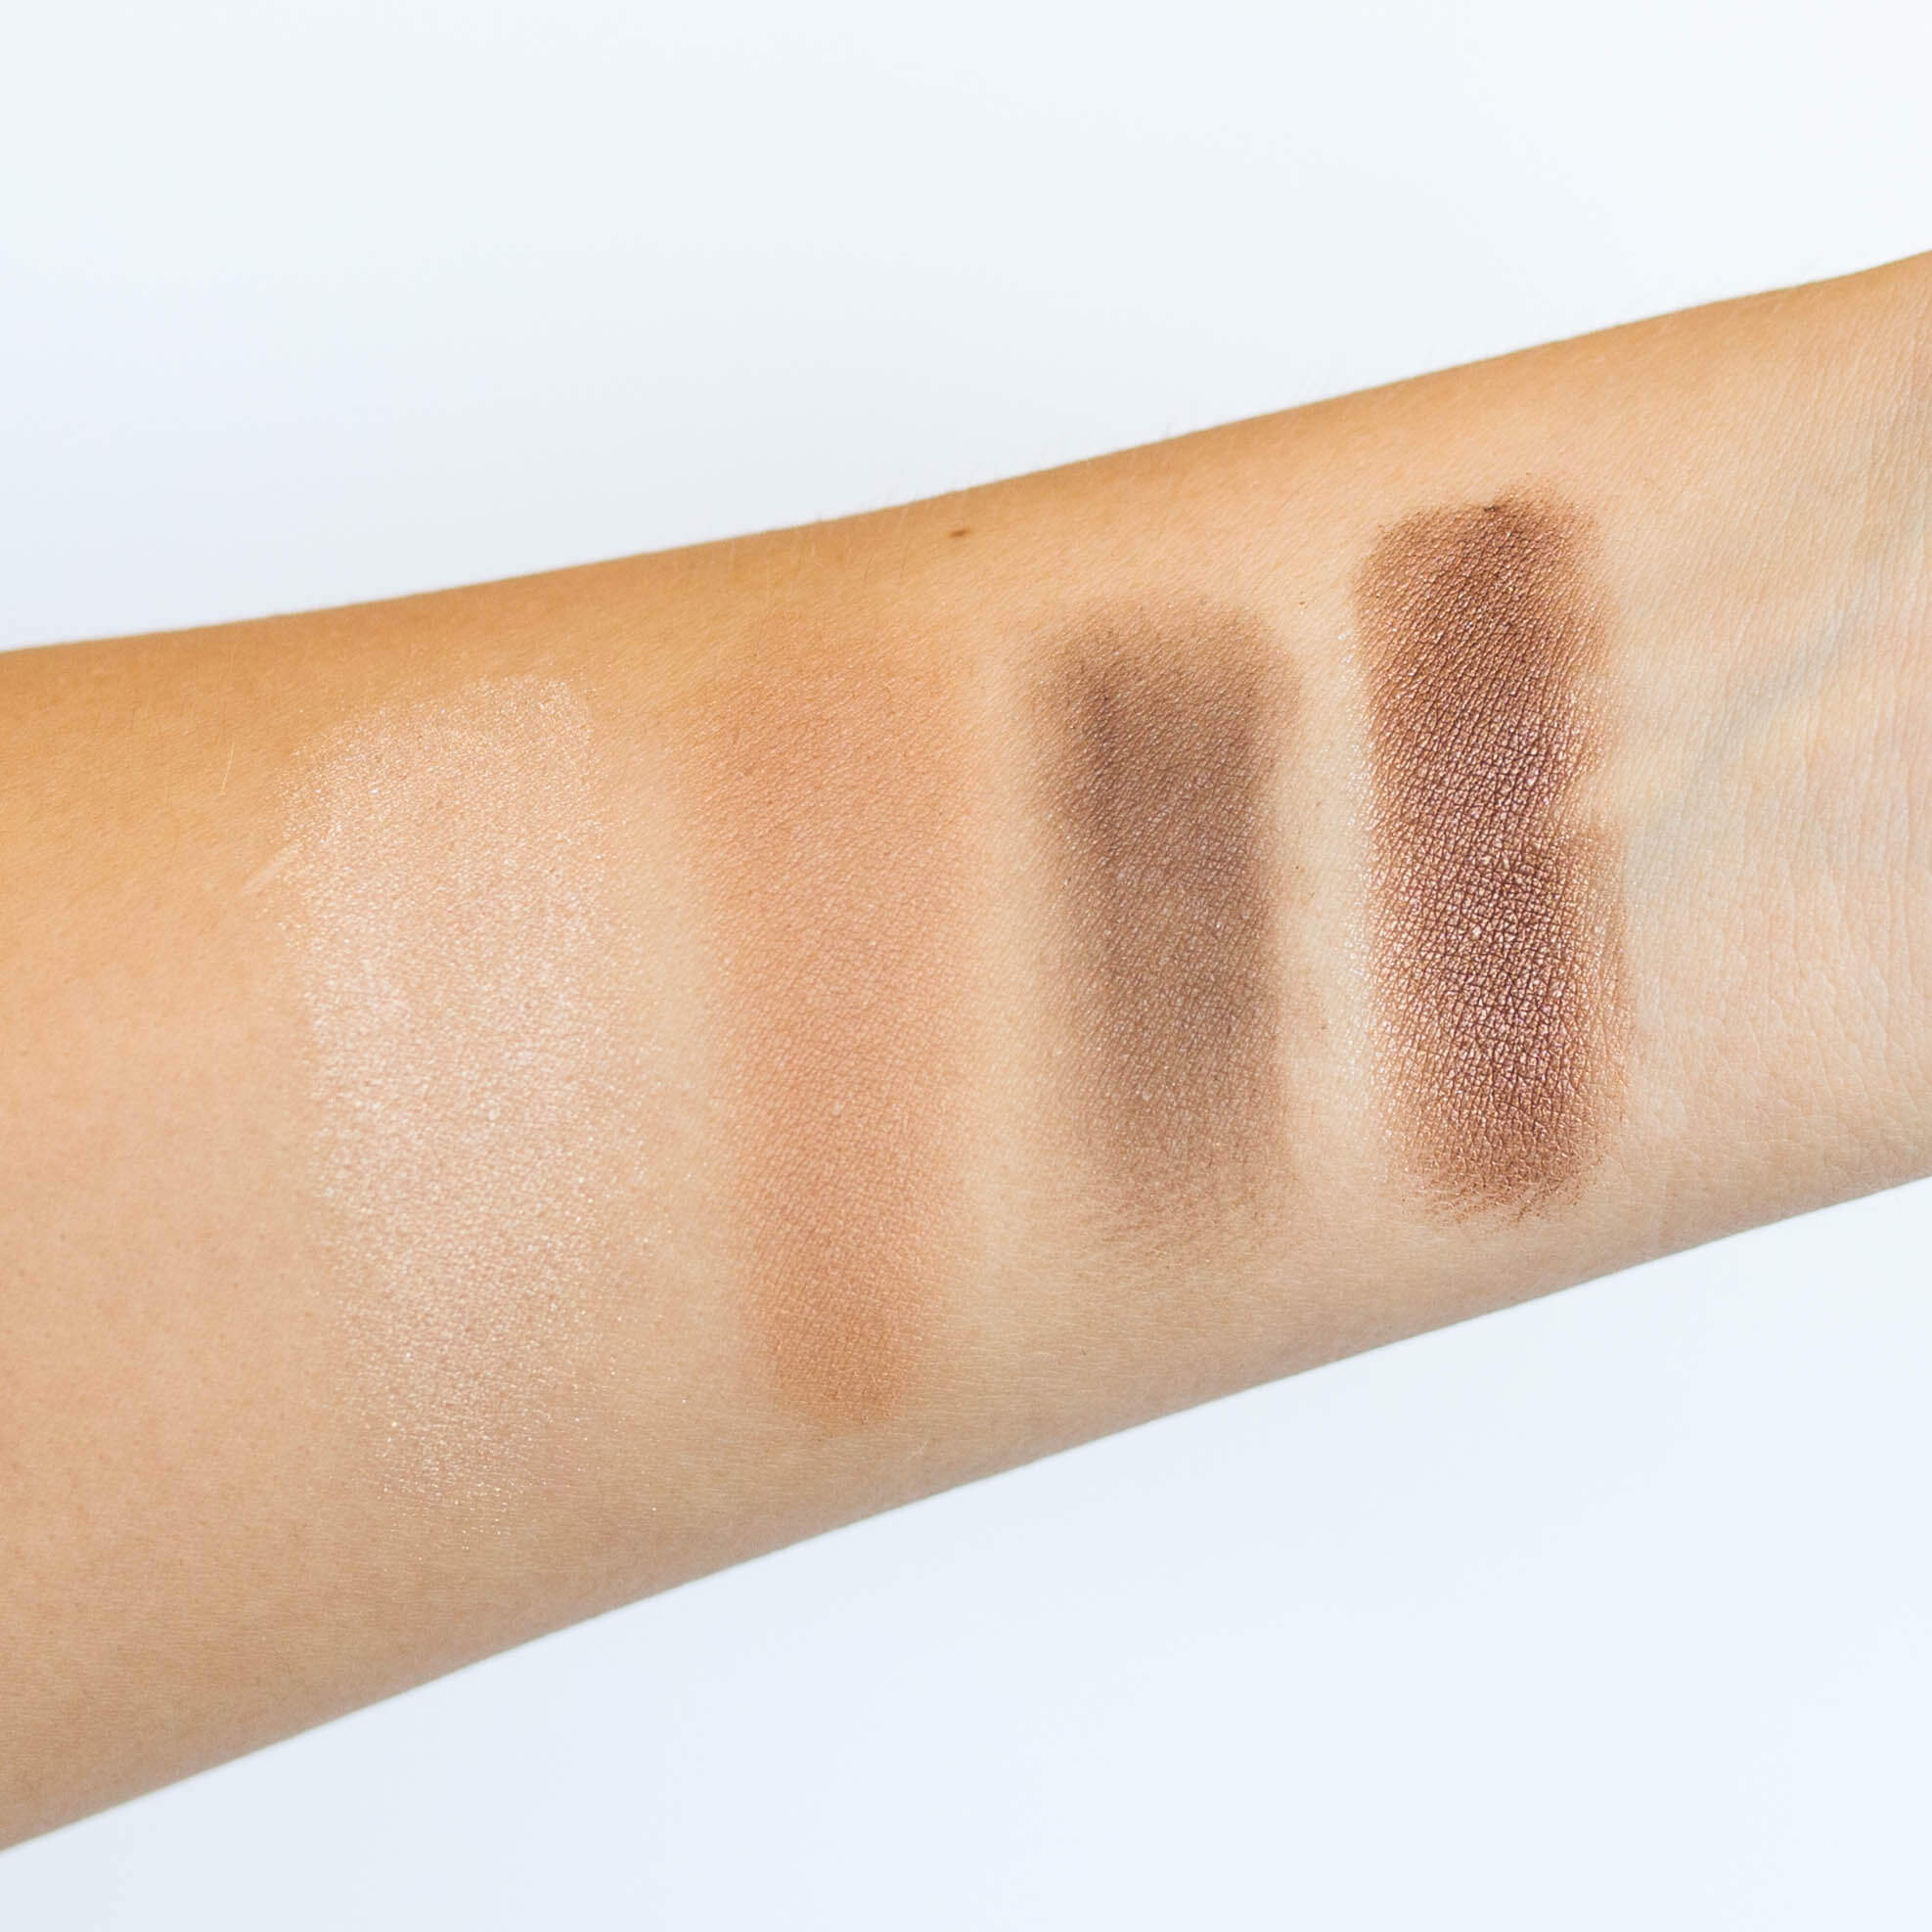 Lilah B Palette Perfection Eye Quad Review + Swatches | Twinspiration